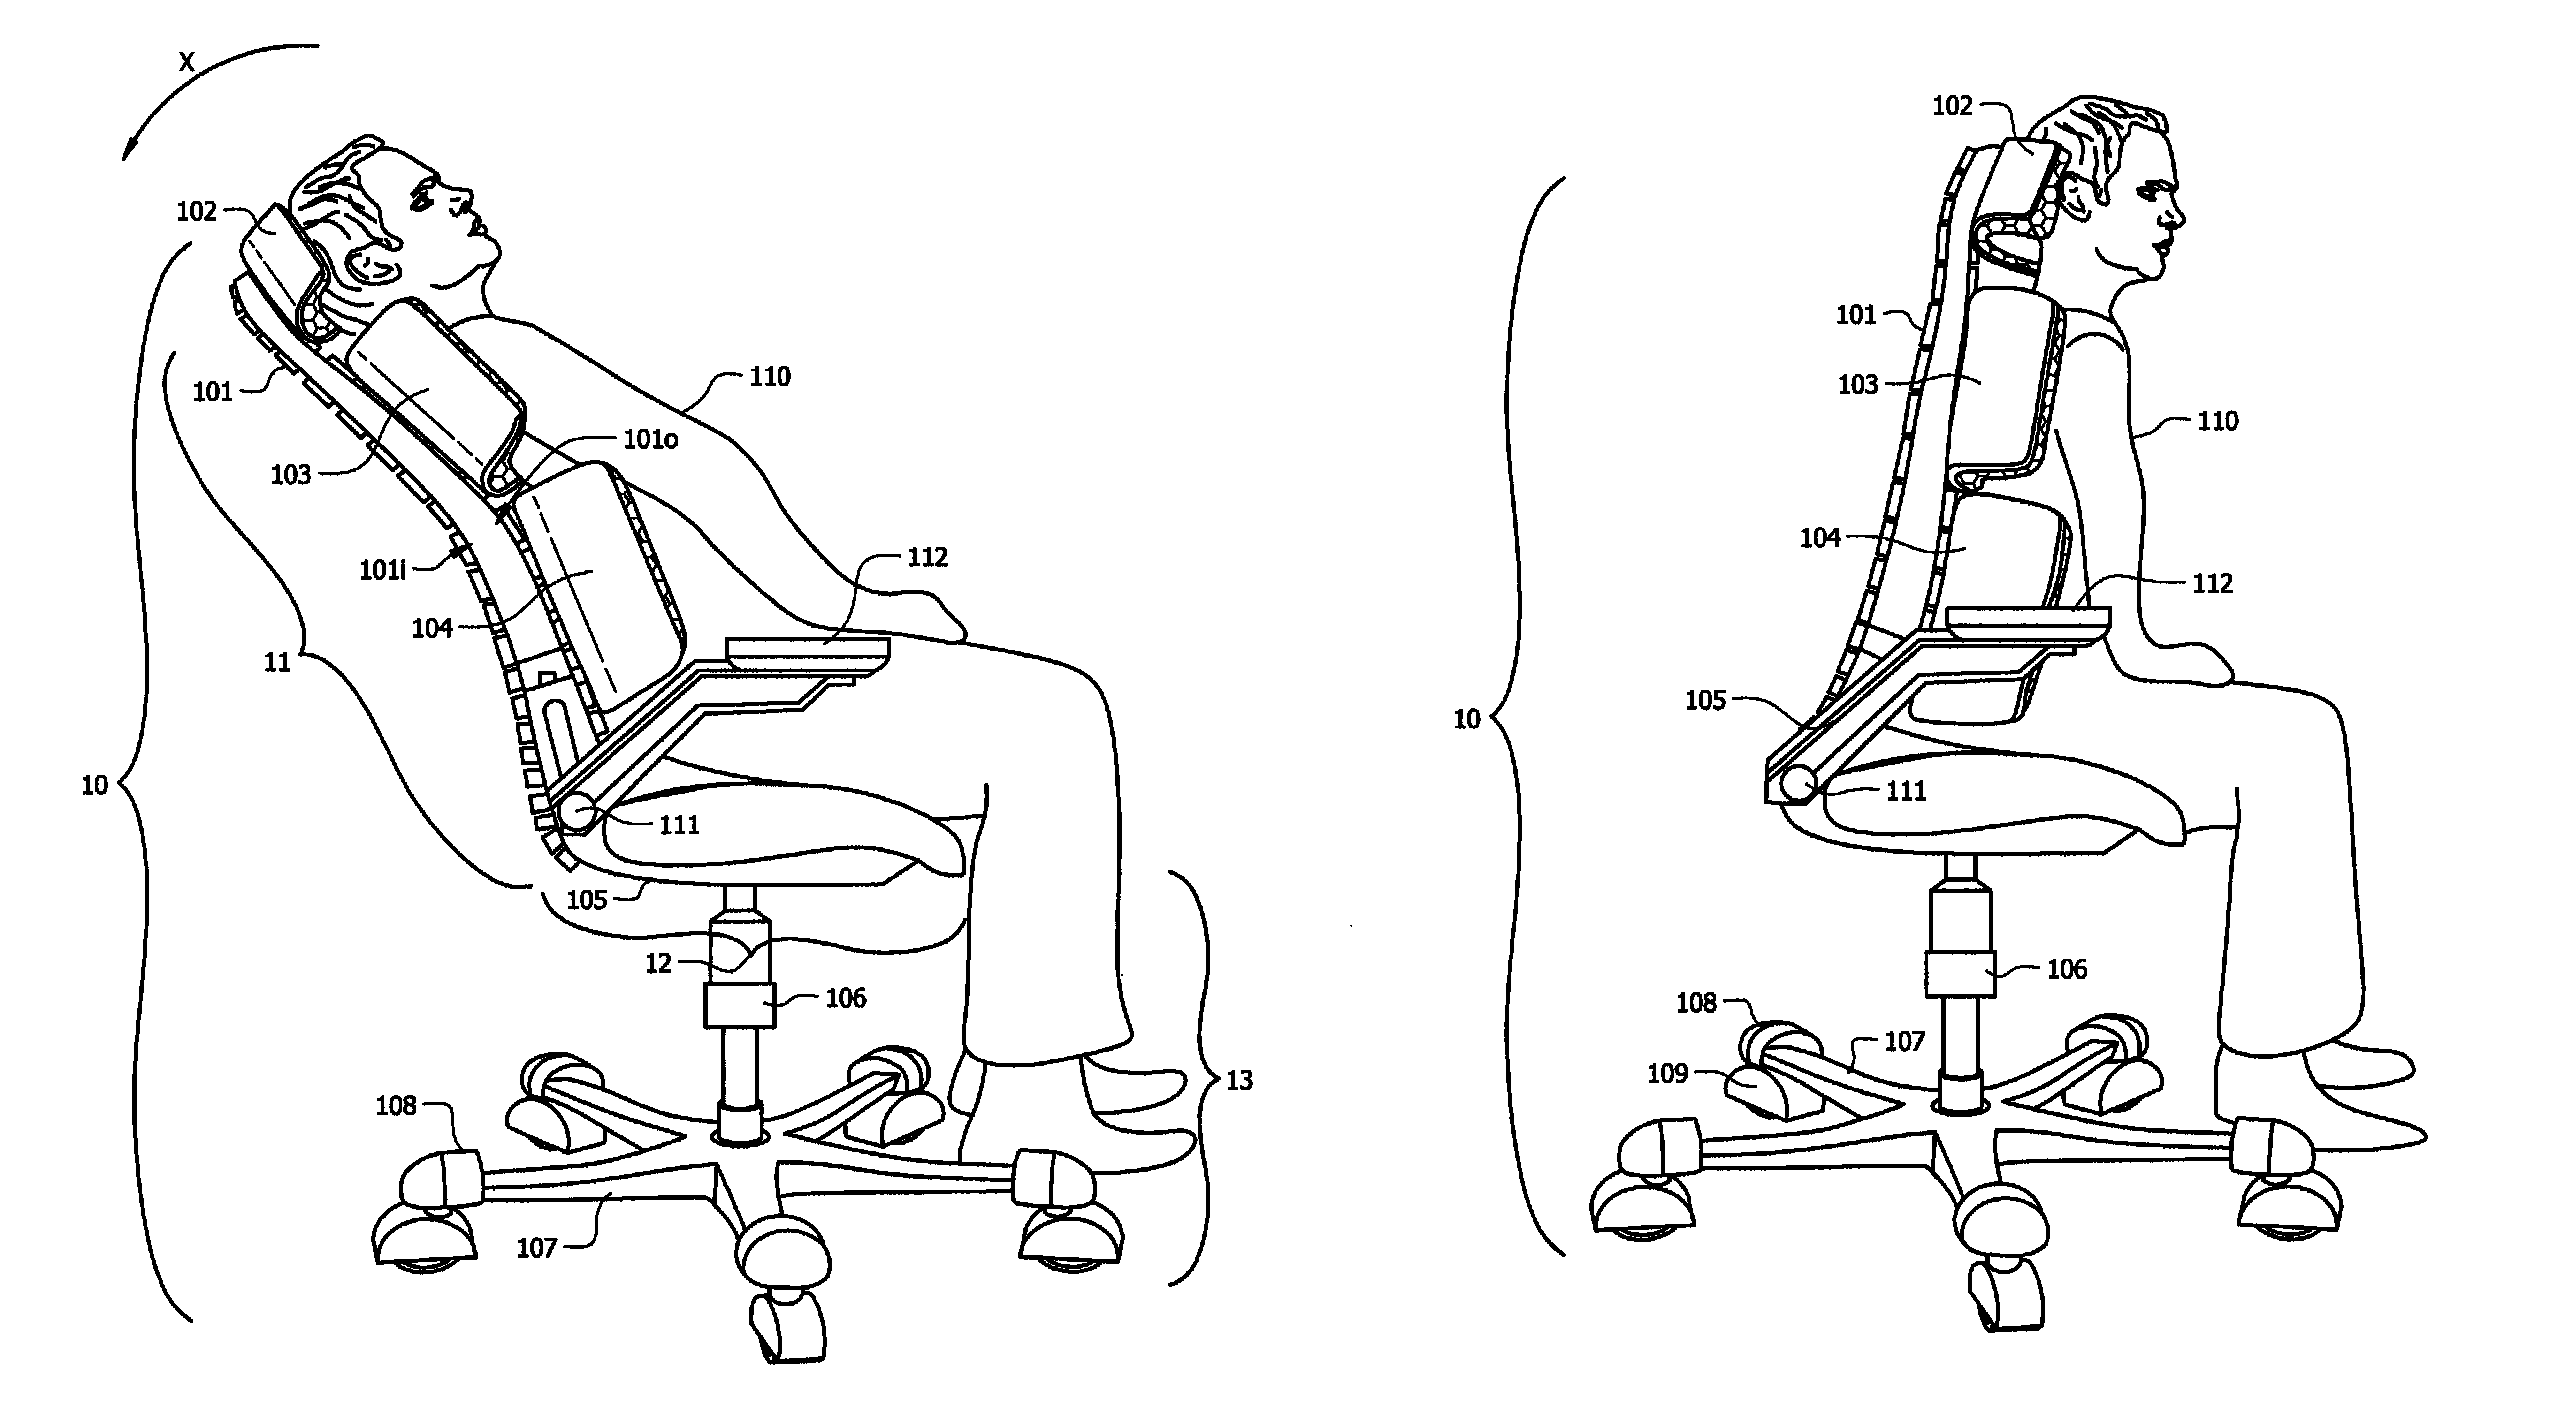 Systems and methods for providing ergonomic exercise chairs